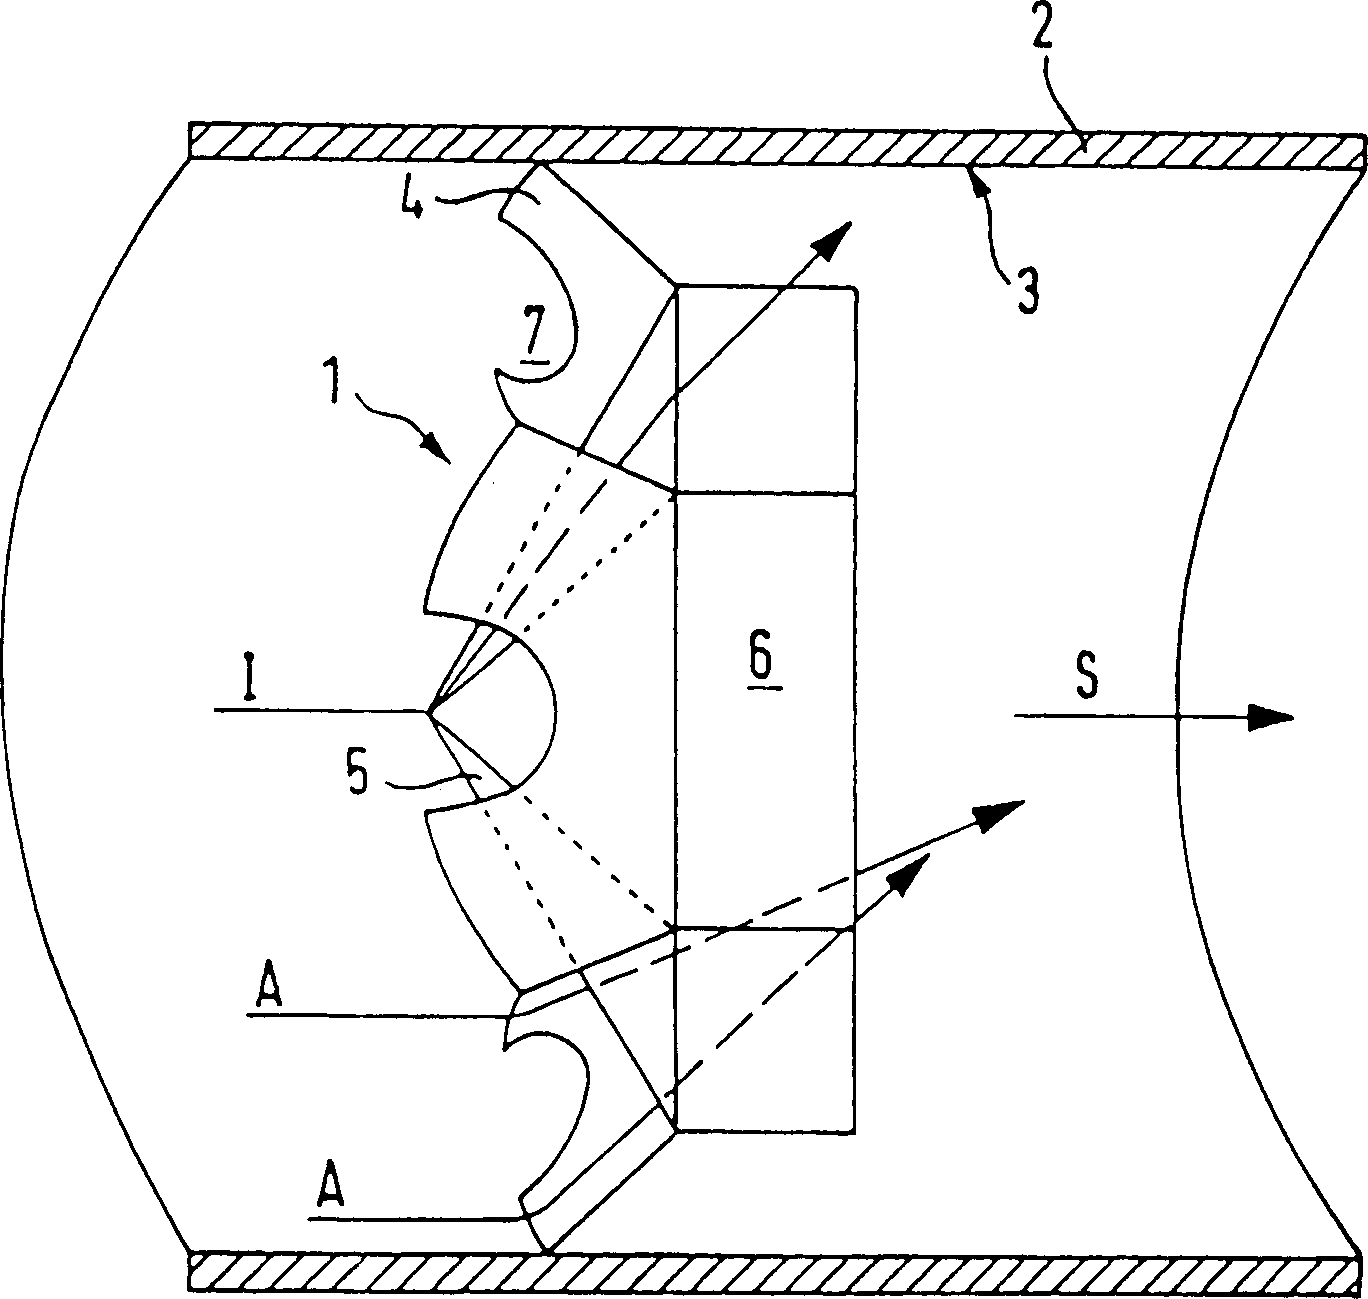 Mixer element for fluid that is guided in pipe